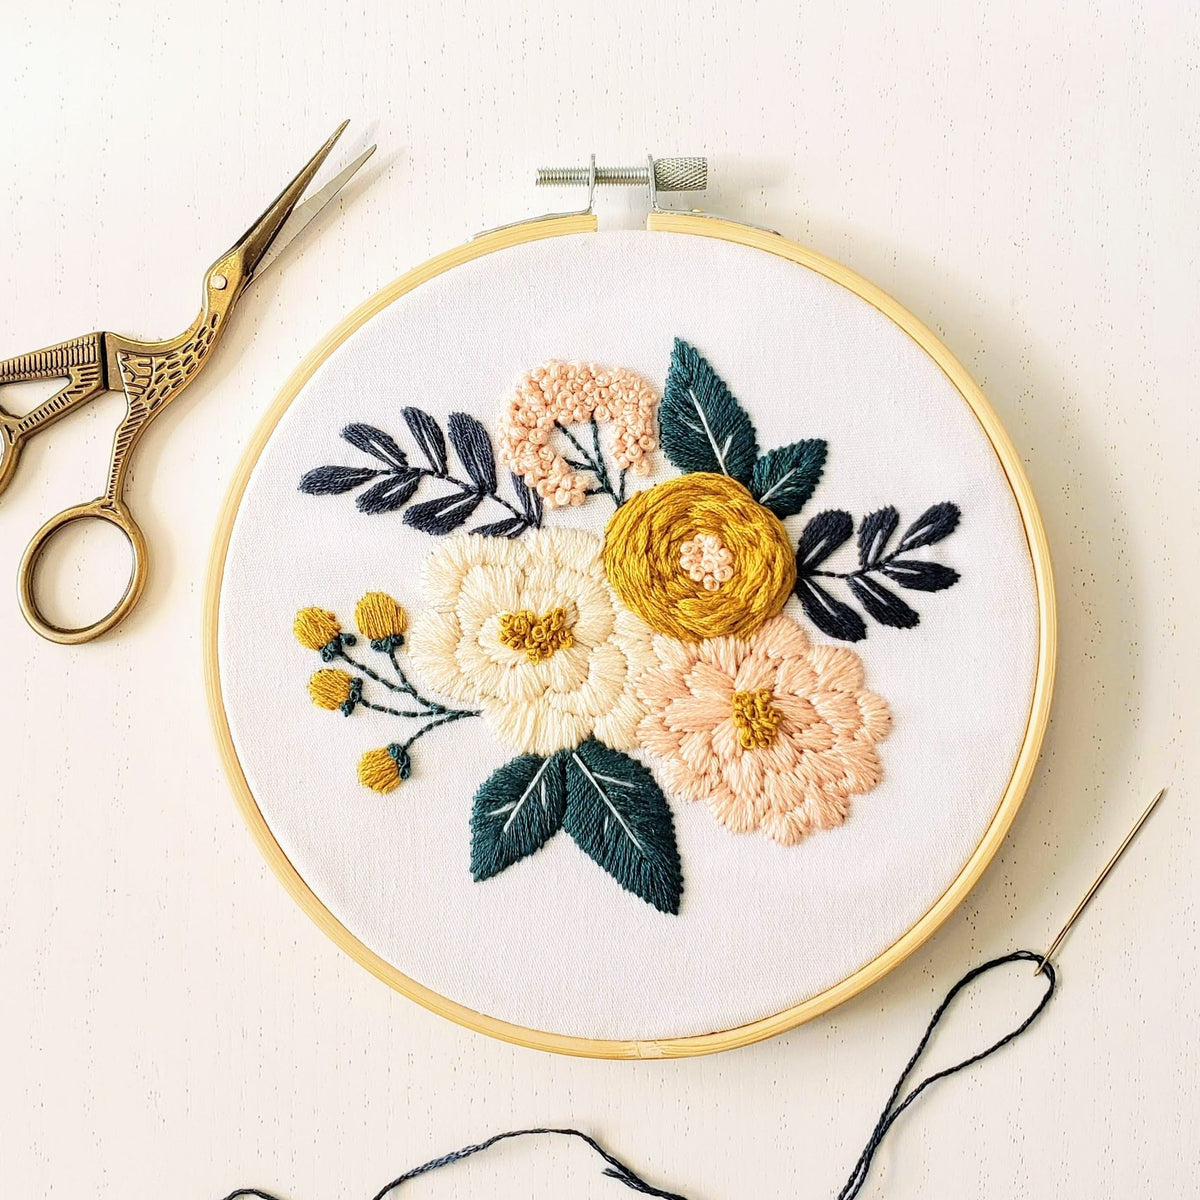 Beginner's Embroidery Class – Assembly: gather + create